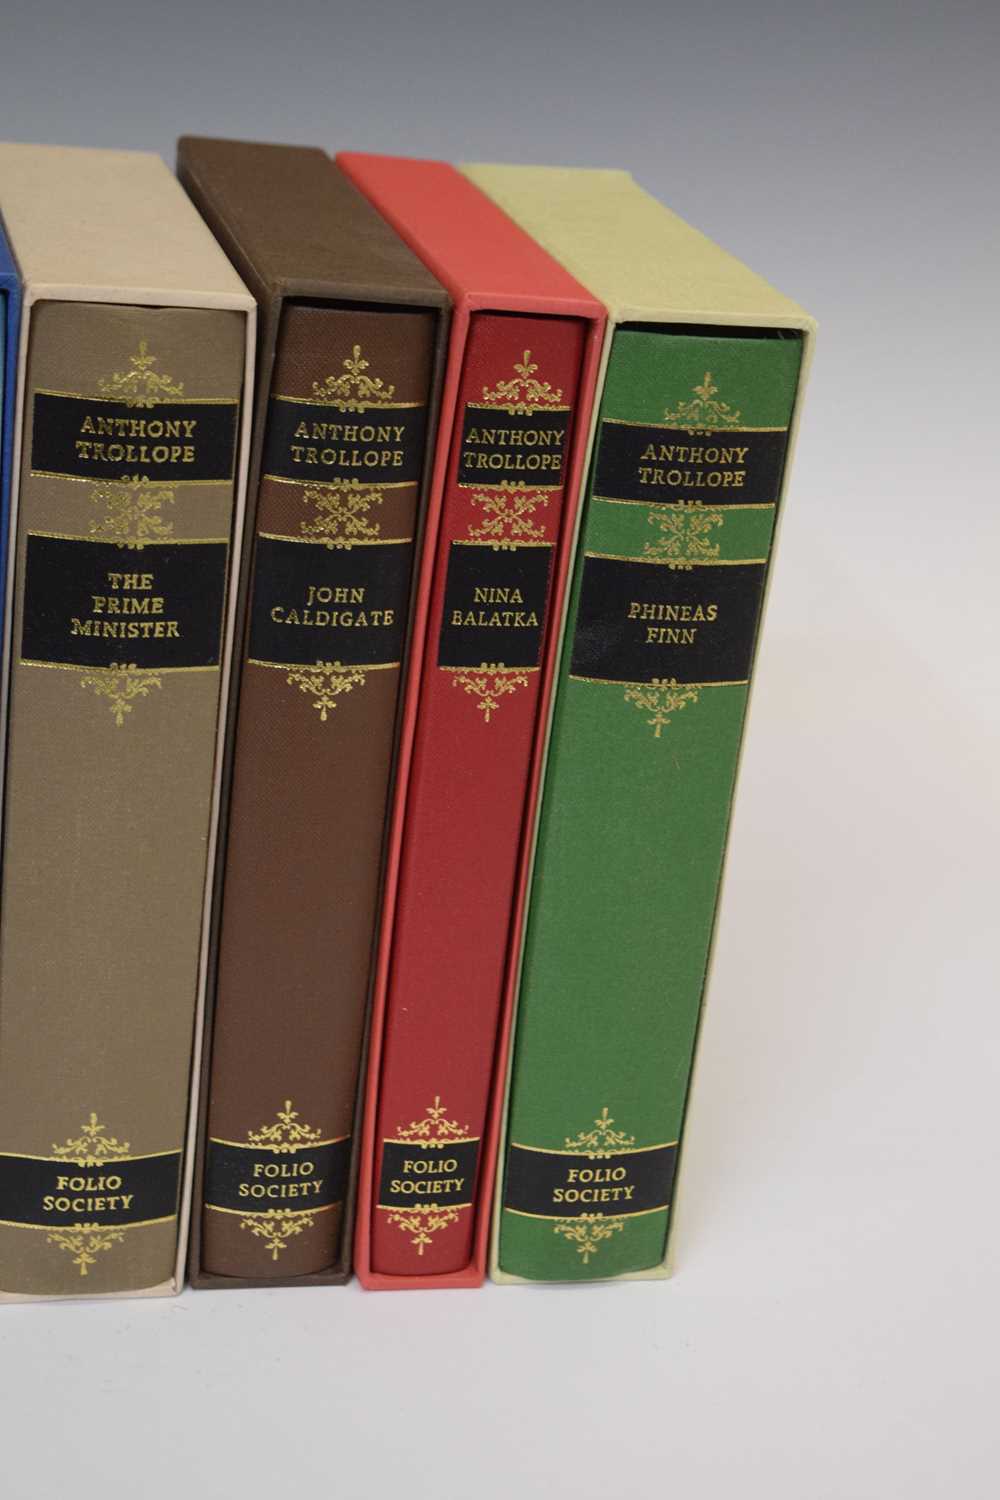 Twelve books by Anthony Trollope, Folio Society editions in slipcases - Image 8 of 8